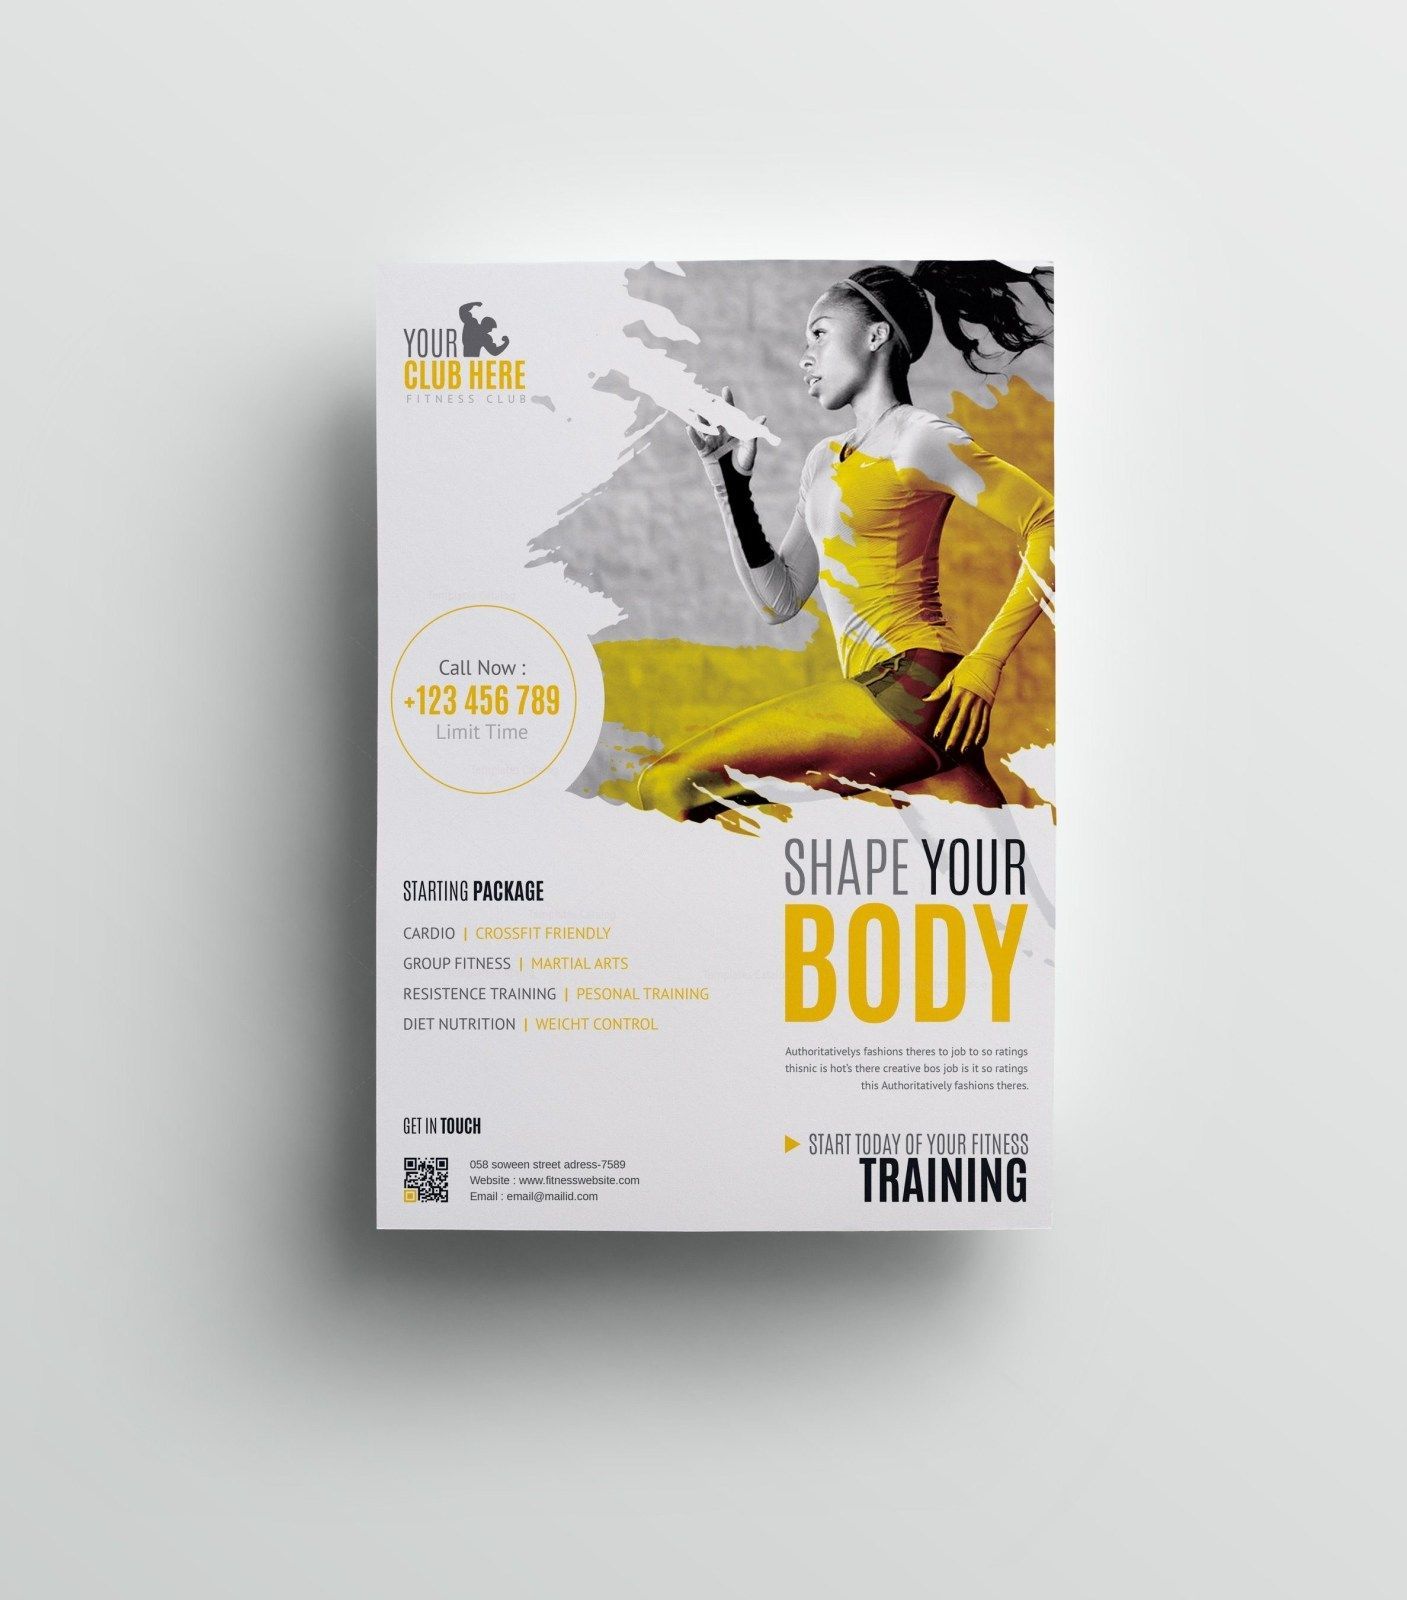 Fitness Club Professional Flyer Design Template 001511 - Template Catalog - Fitness Club Professional Flyer Design Template 001511 - Template Catalog -   16 fitness Design layout ideas